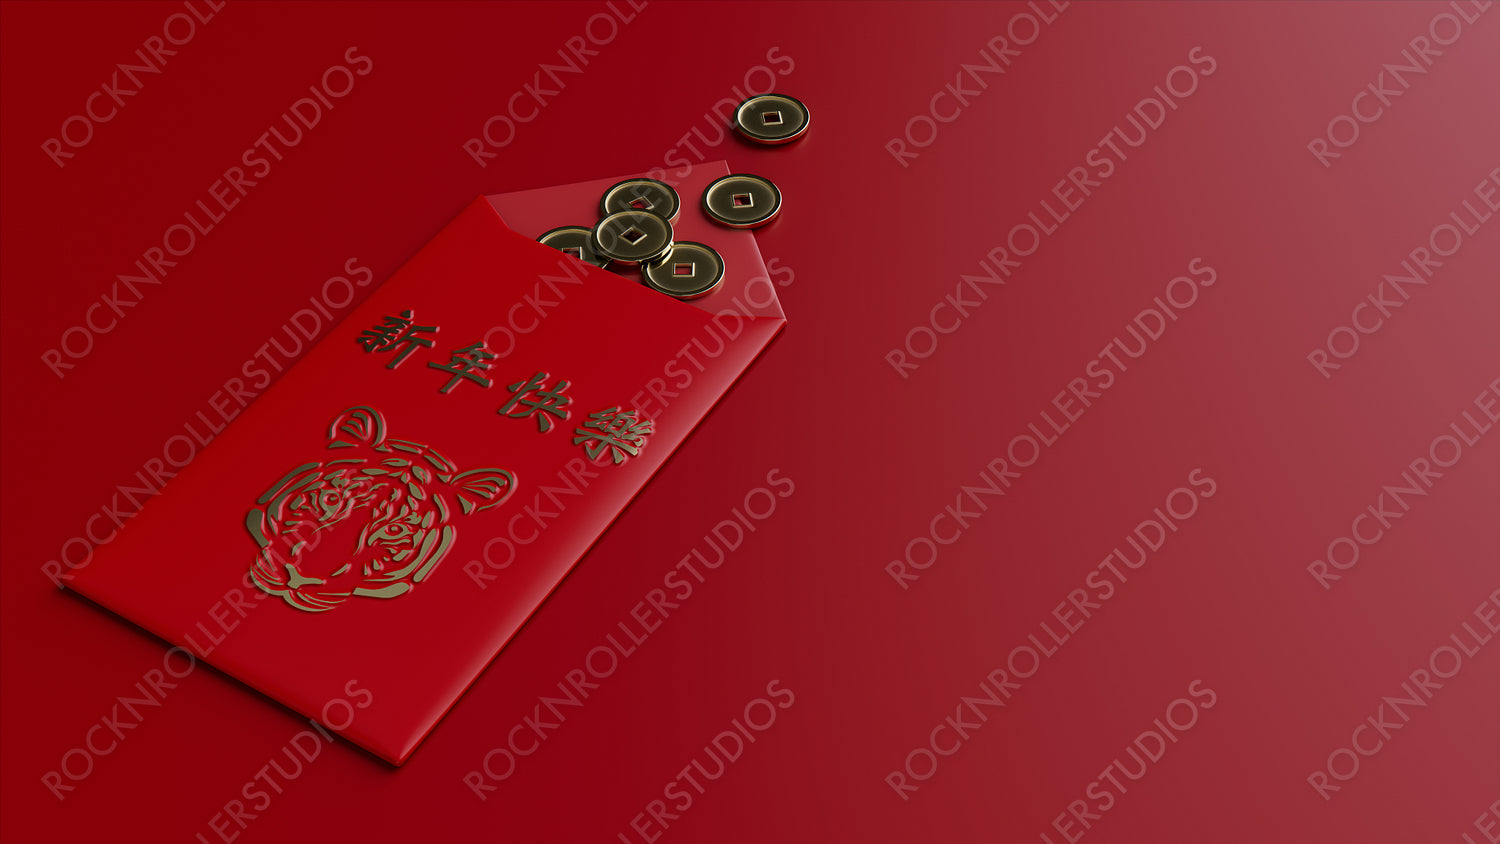 Chinese New Year Concept, with Traditional Red Envelope and Gold Coins. Tiger Design with the message "Happy New Year".